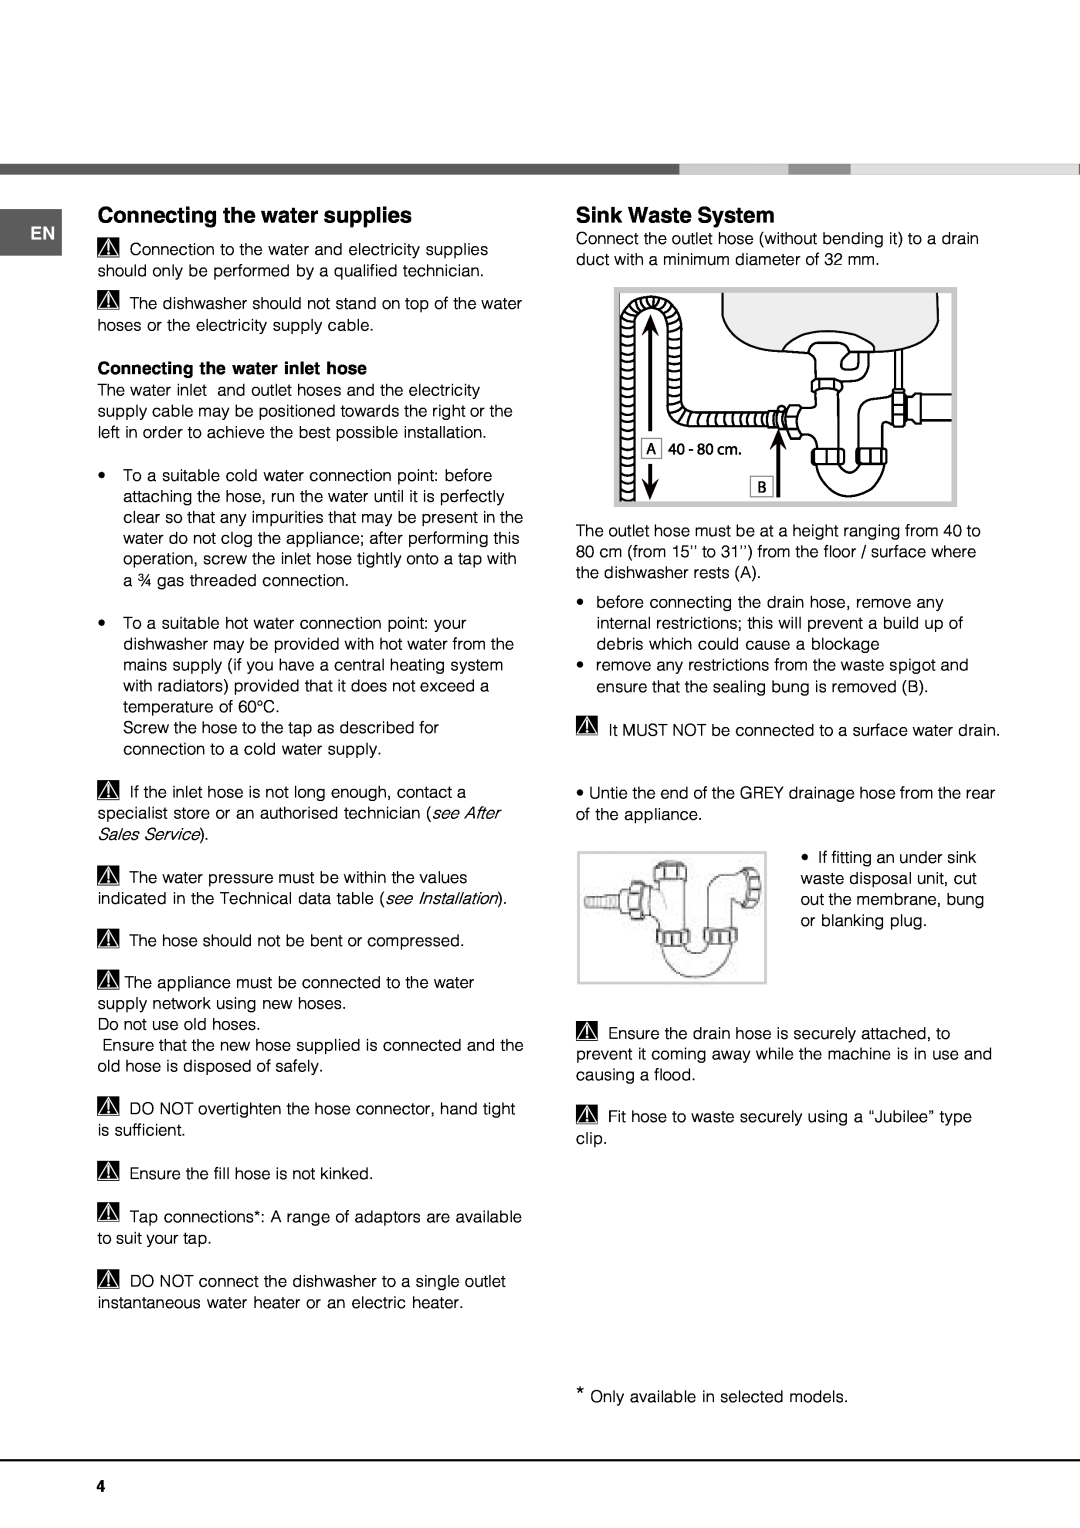 Hotpoint lft 04 manual Connecting the water supplies, Sink Waste System, Connecting the water inlet hose 